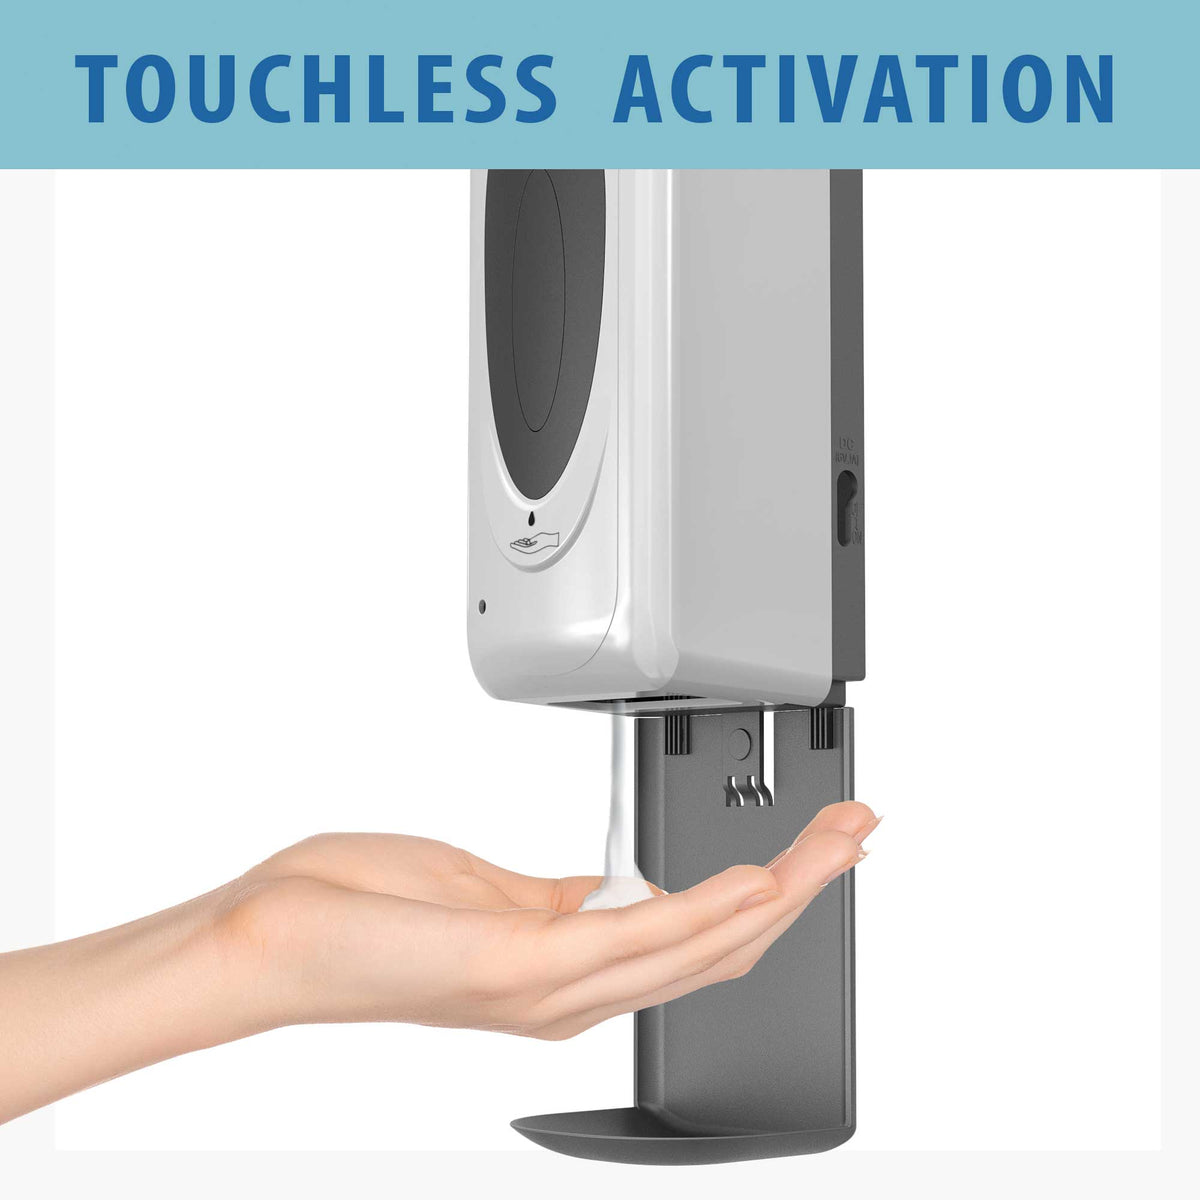 Touchless Activation